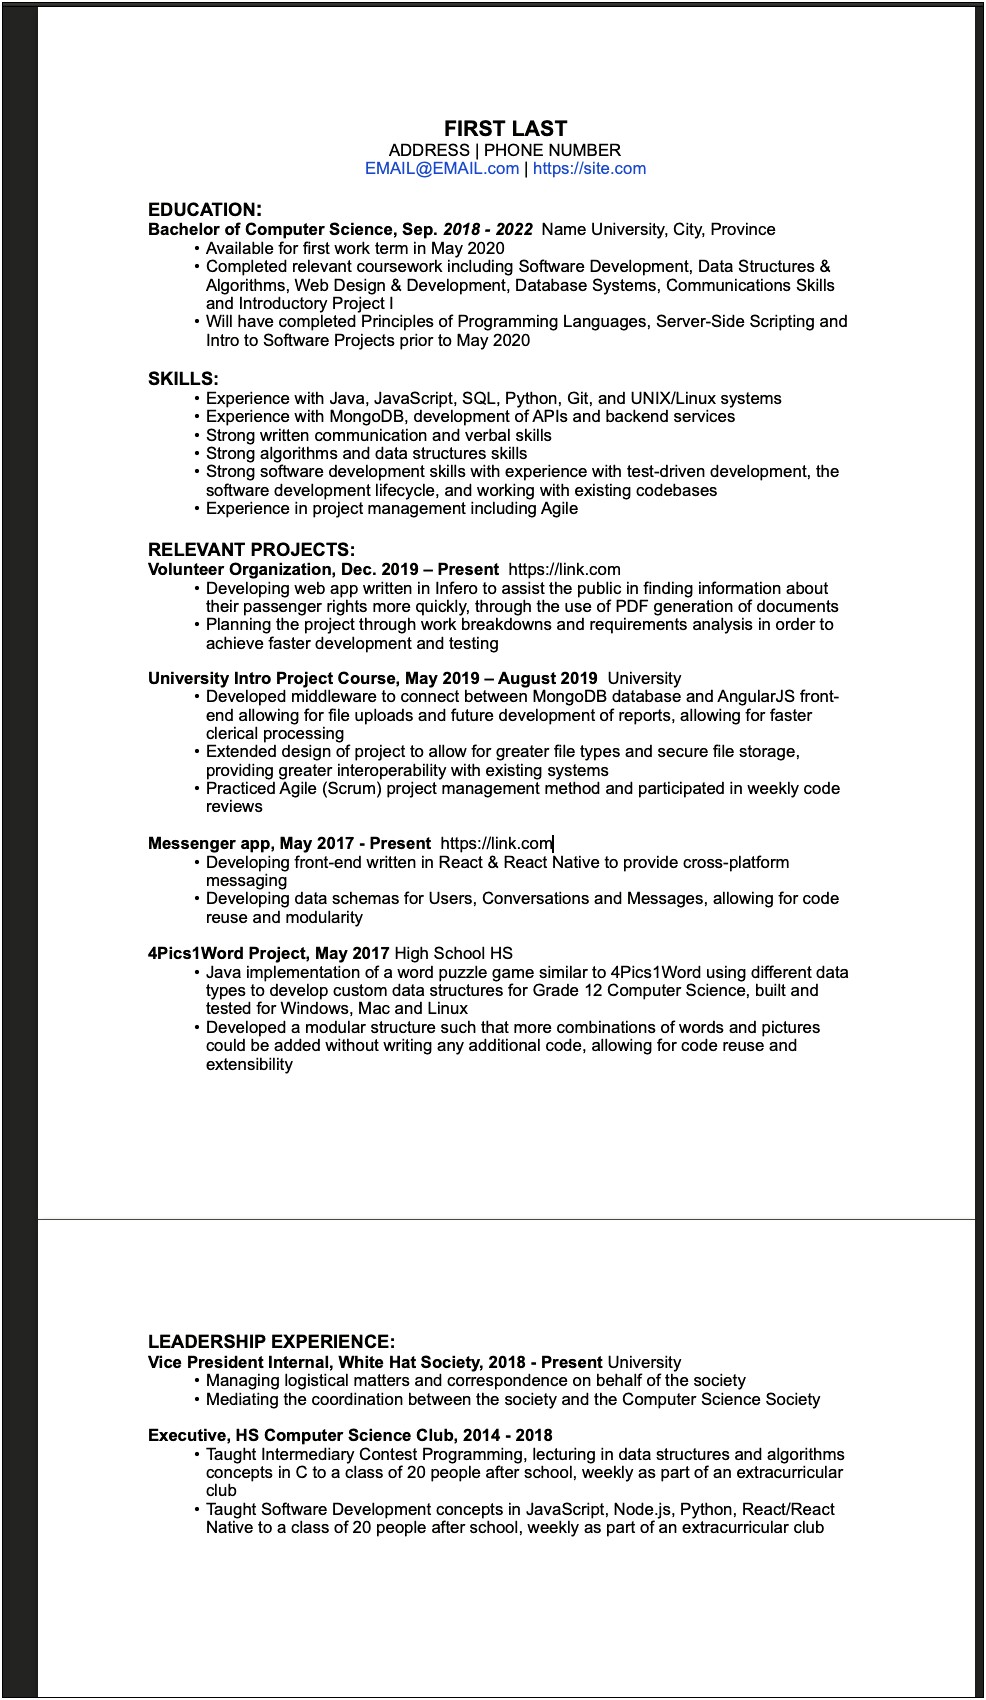 Resume Word For Used A Type Of Program